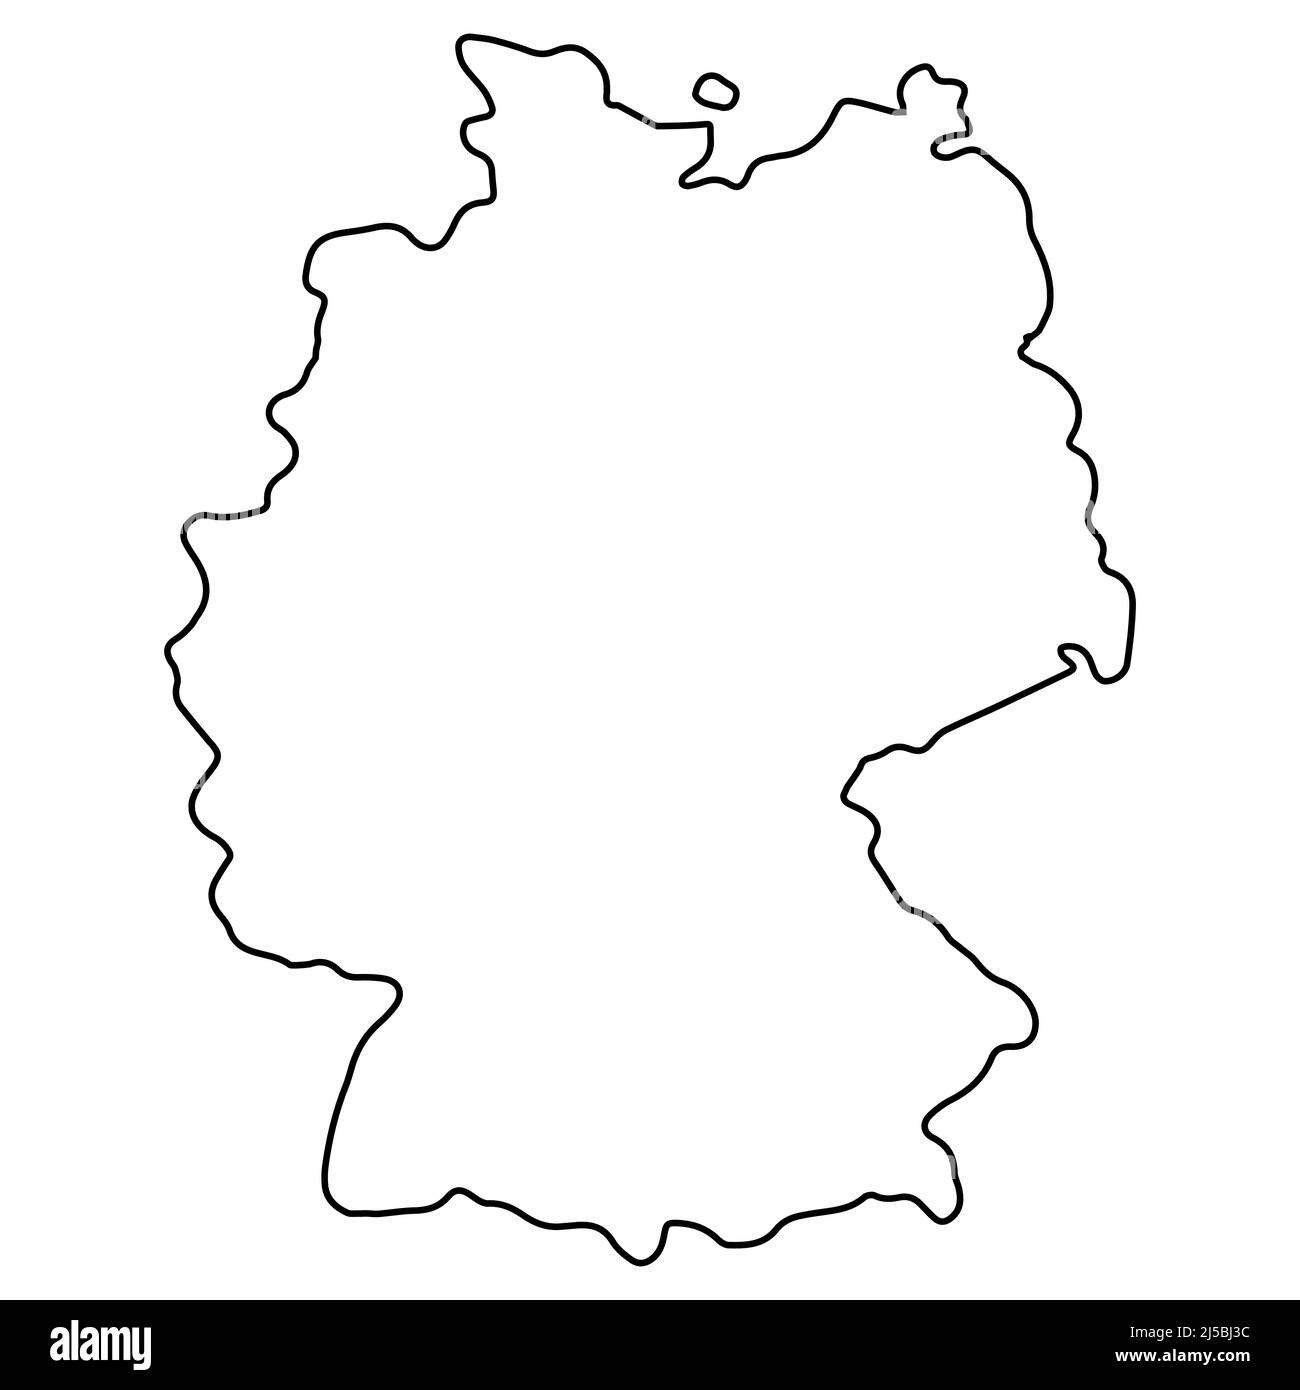 Outline map of Germany, geographic borders of the country deutschland, deutsch land Stock Vector